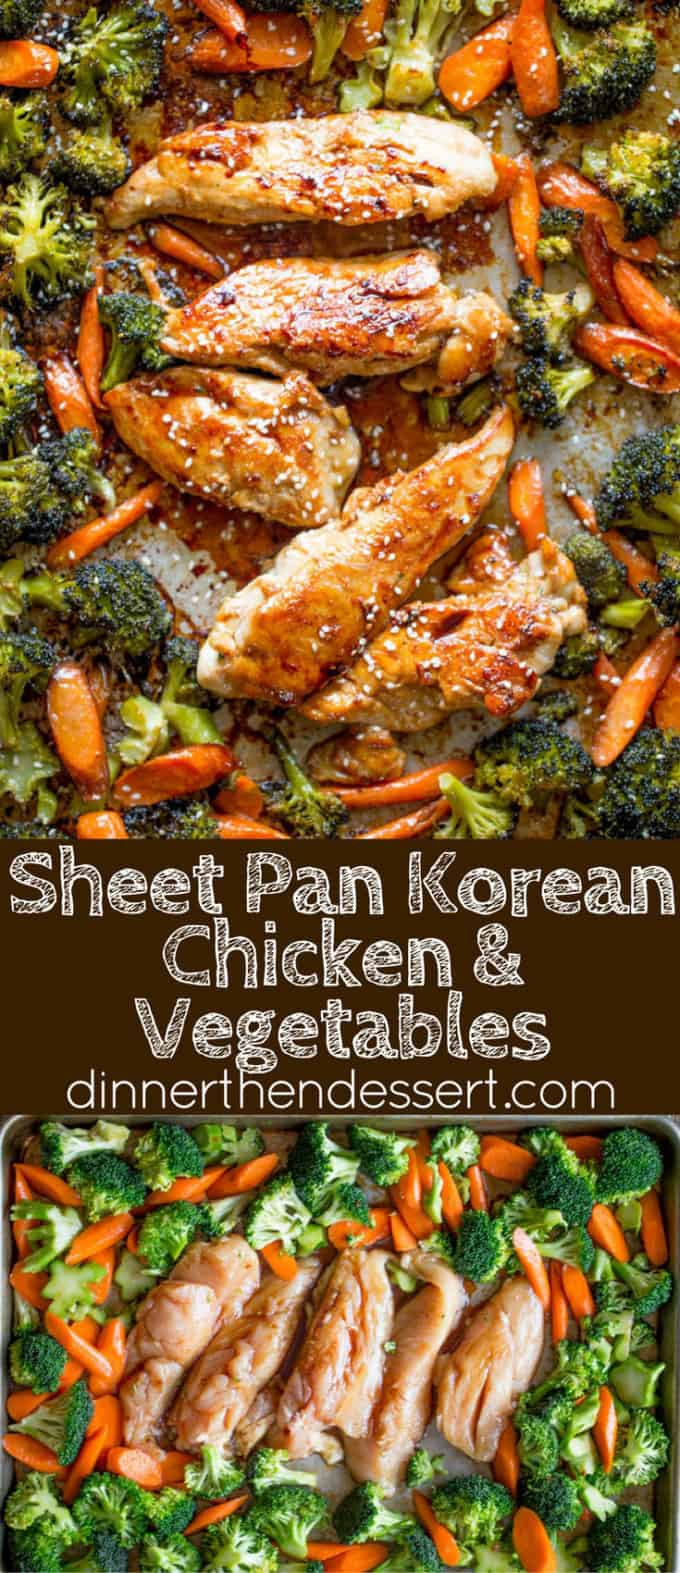 Sheet Pan Korean Chicken and Vegetables are a delicious and easy weeknight meal that cooks in one pan and makes crispy tender vegetables and moist sweet and garlicky chicken.